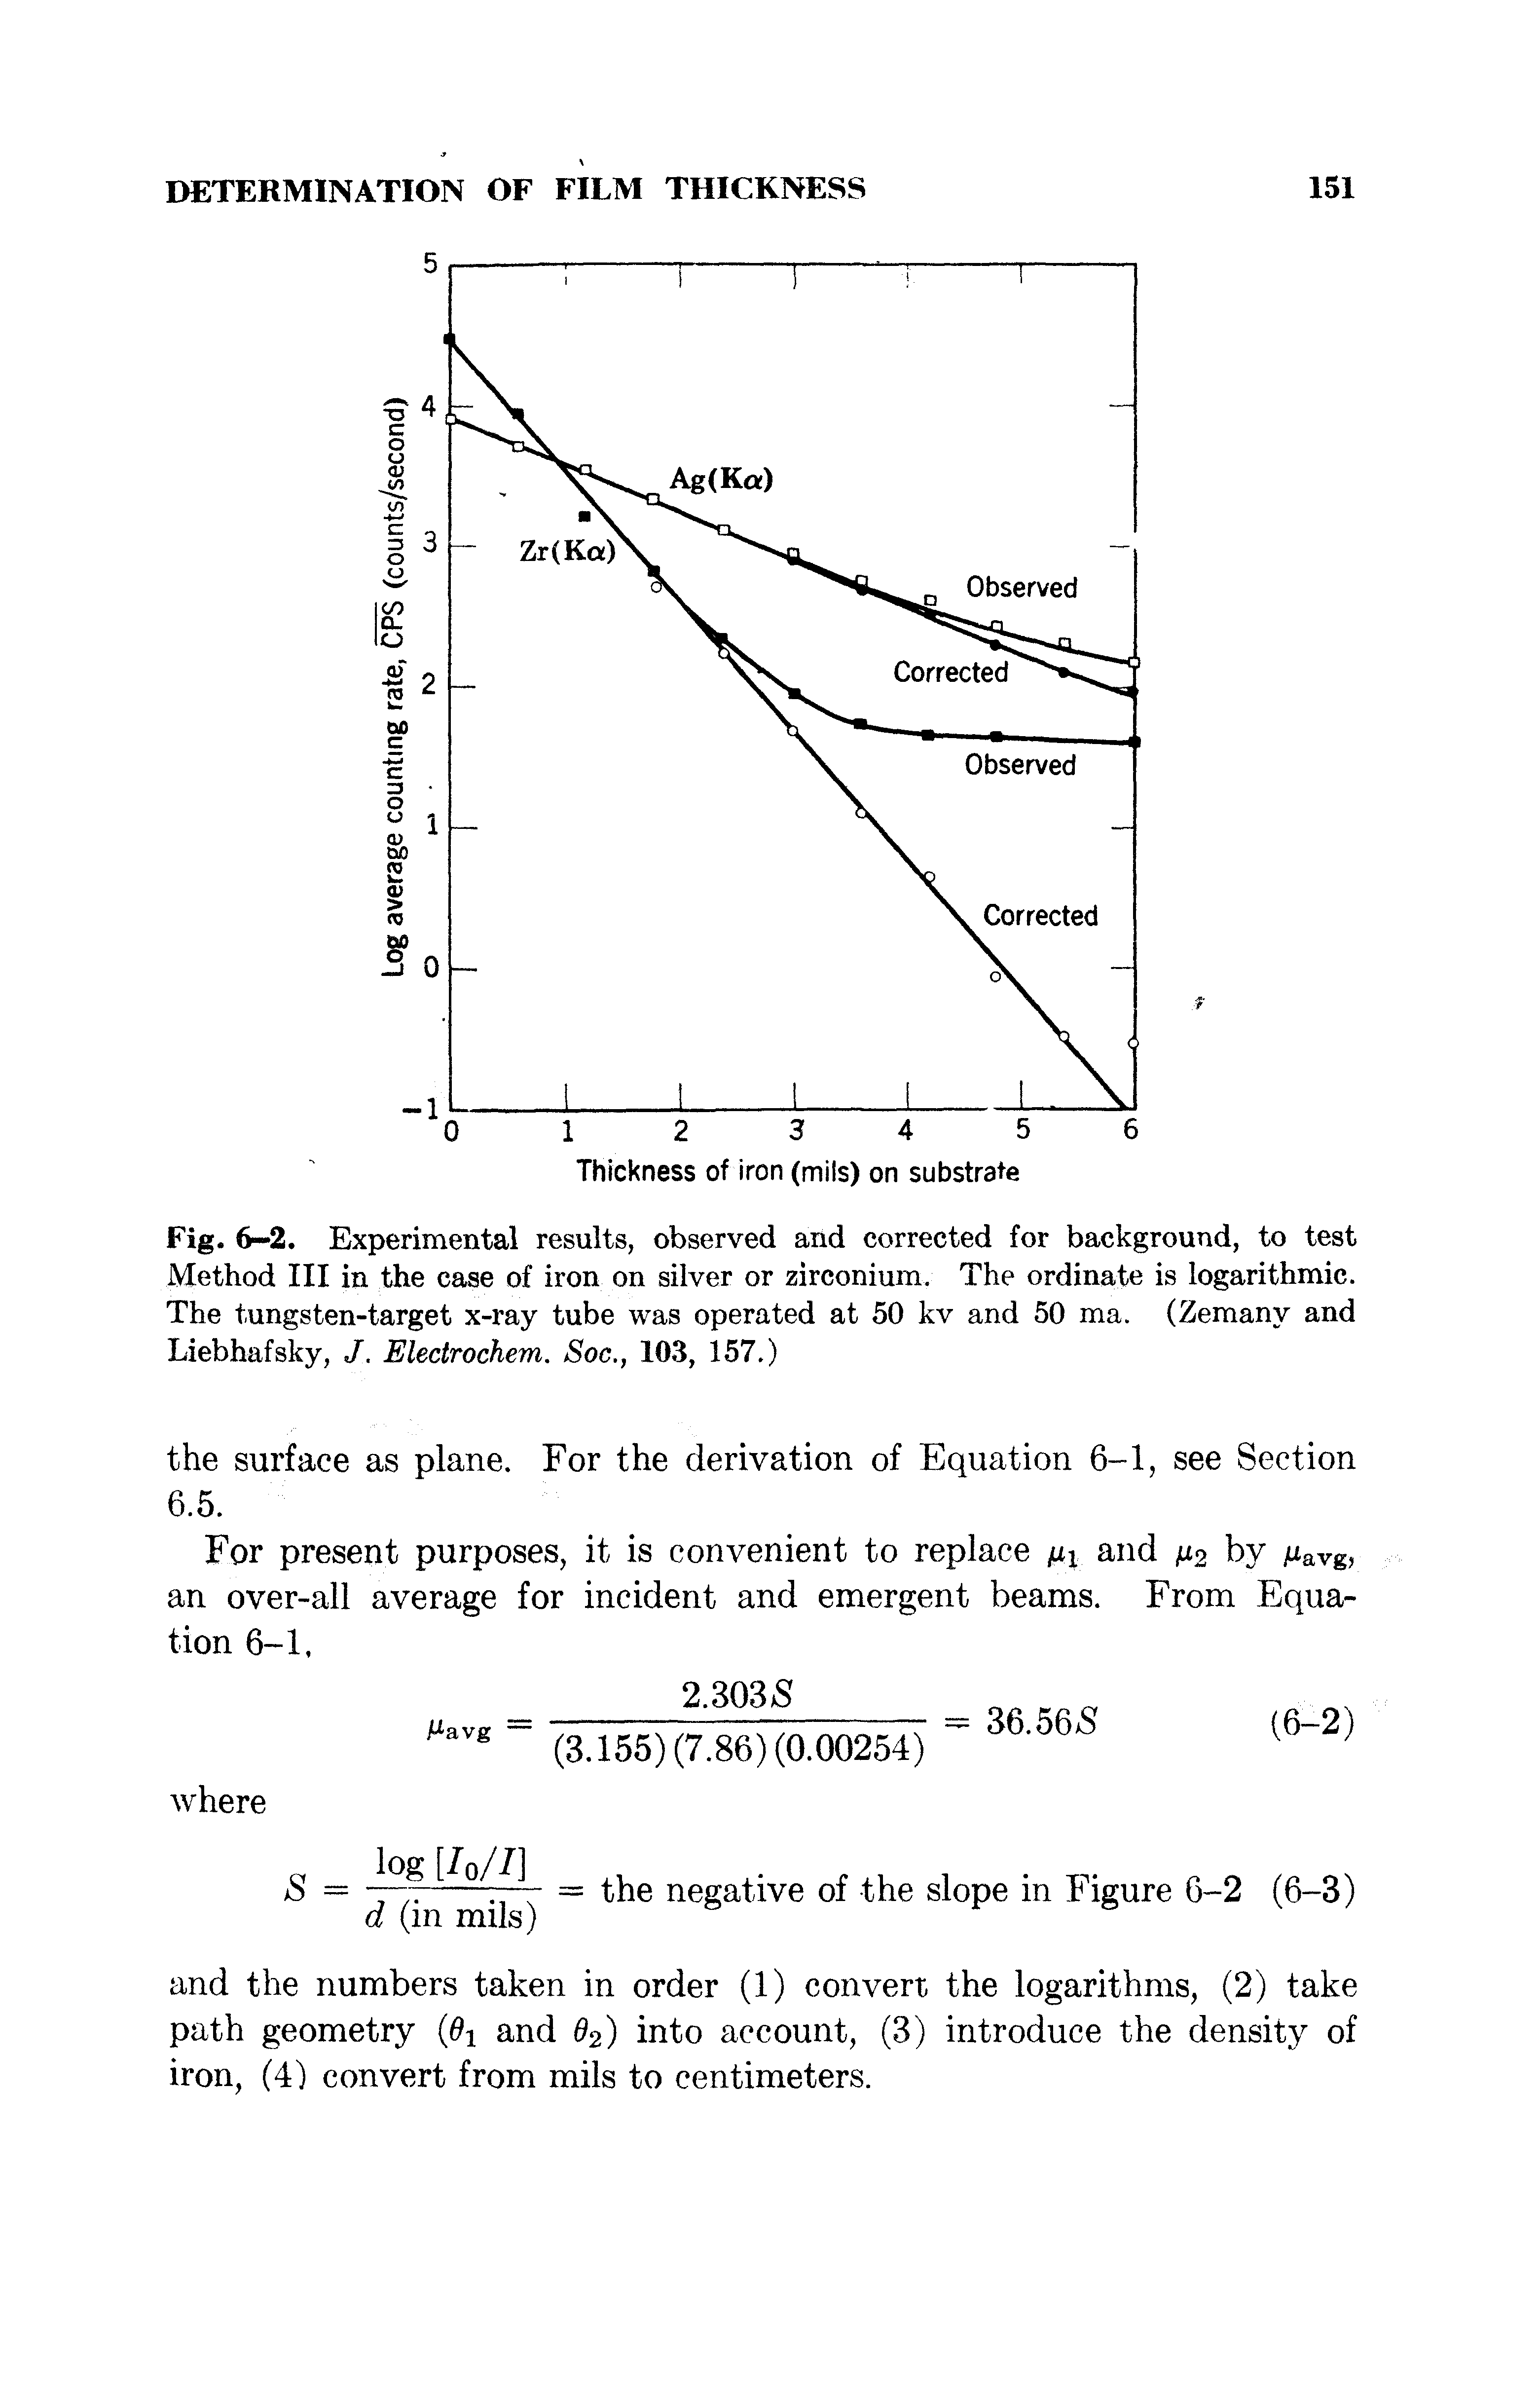 Fig. 6-2. Experimental results, observed arid corrected for background, to test Method III in the case of iron on silver or zirconium. The ordinate is logarithmic. The tungsten-target x-ray tube was operated at 50 kv and 50 ma. (Zemanv and Liebhafsky, J. Electrochem. Soc., 103, 157.)...